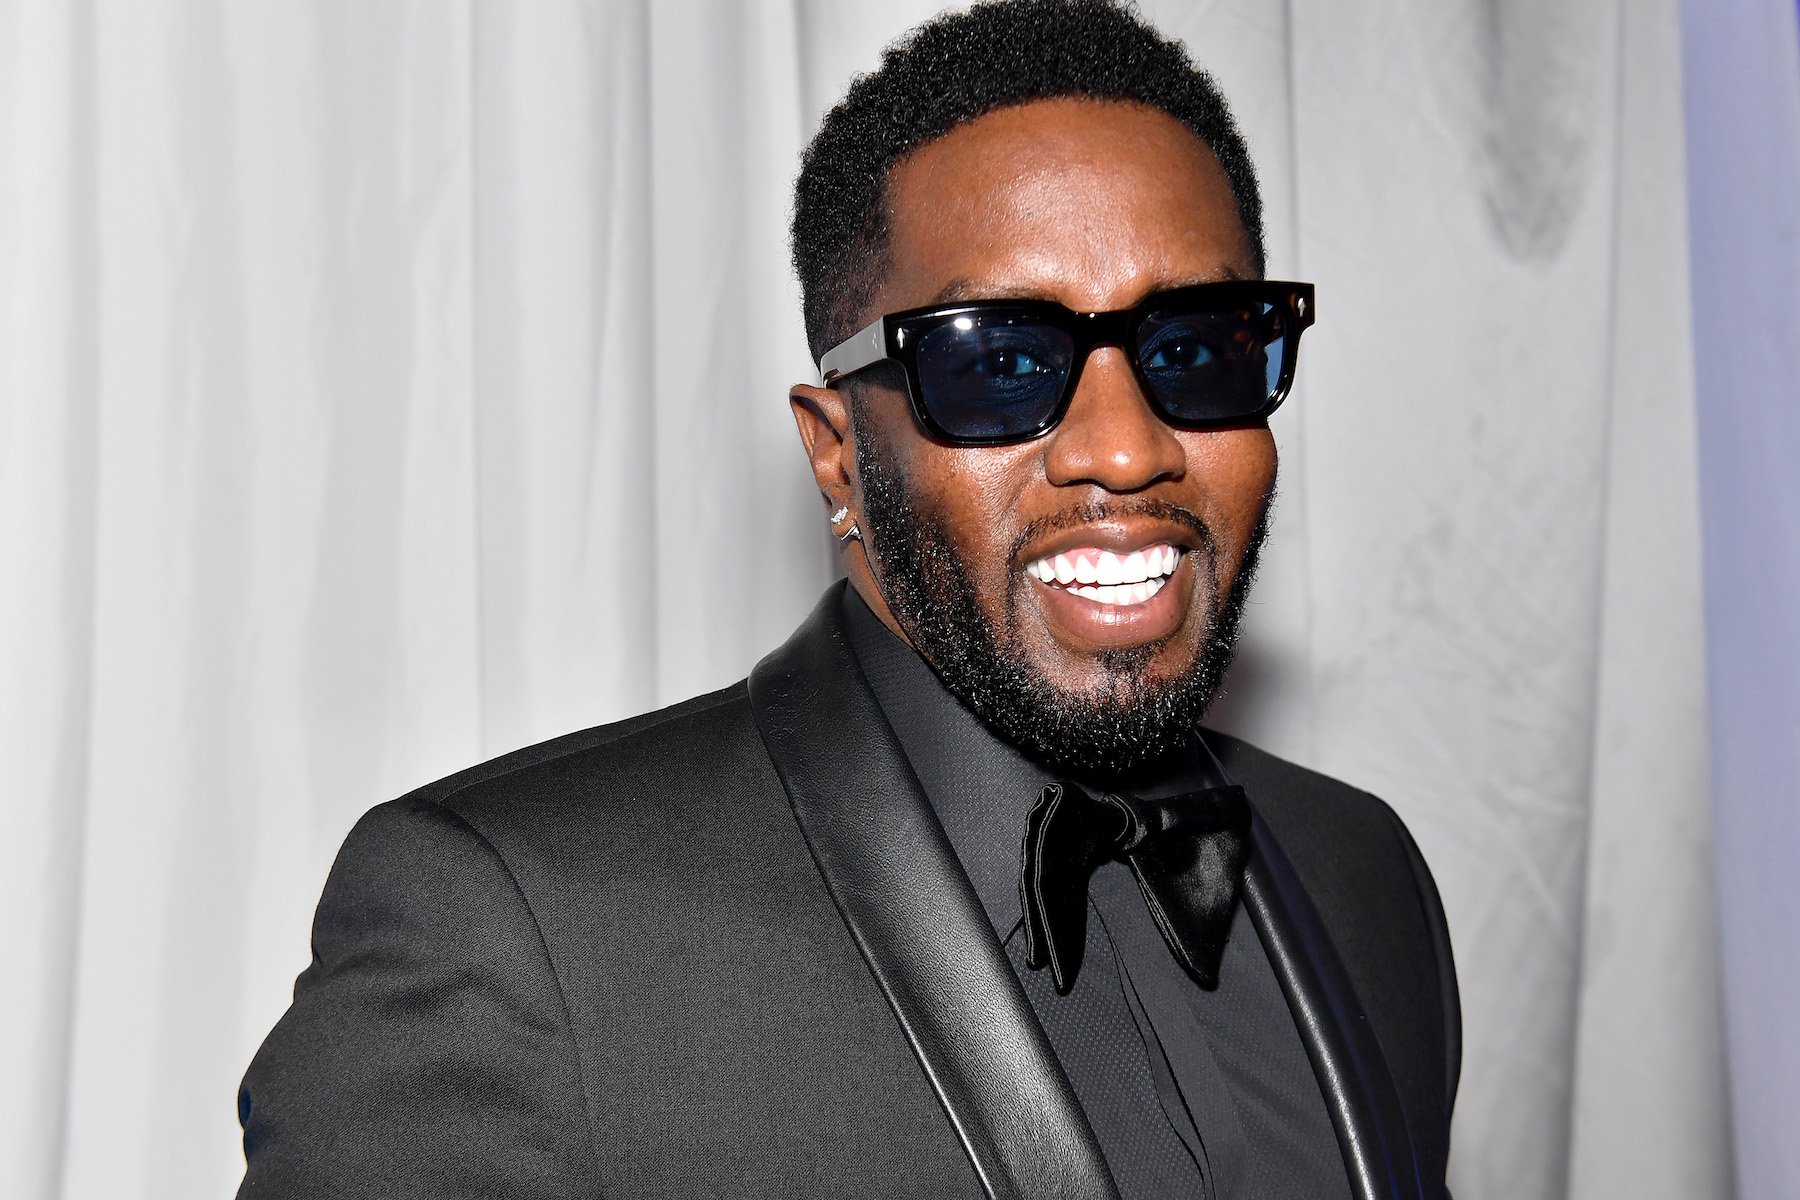 Sean "Diddy" Combs, the rapper behind 'Sex in the Porsche' with PartyNextDoor, smiling for a photo